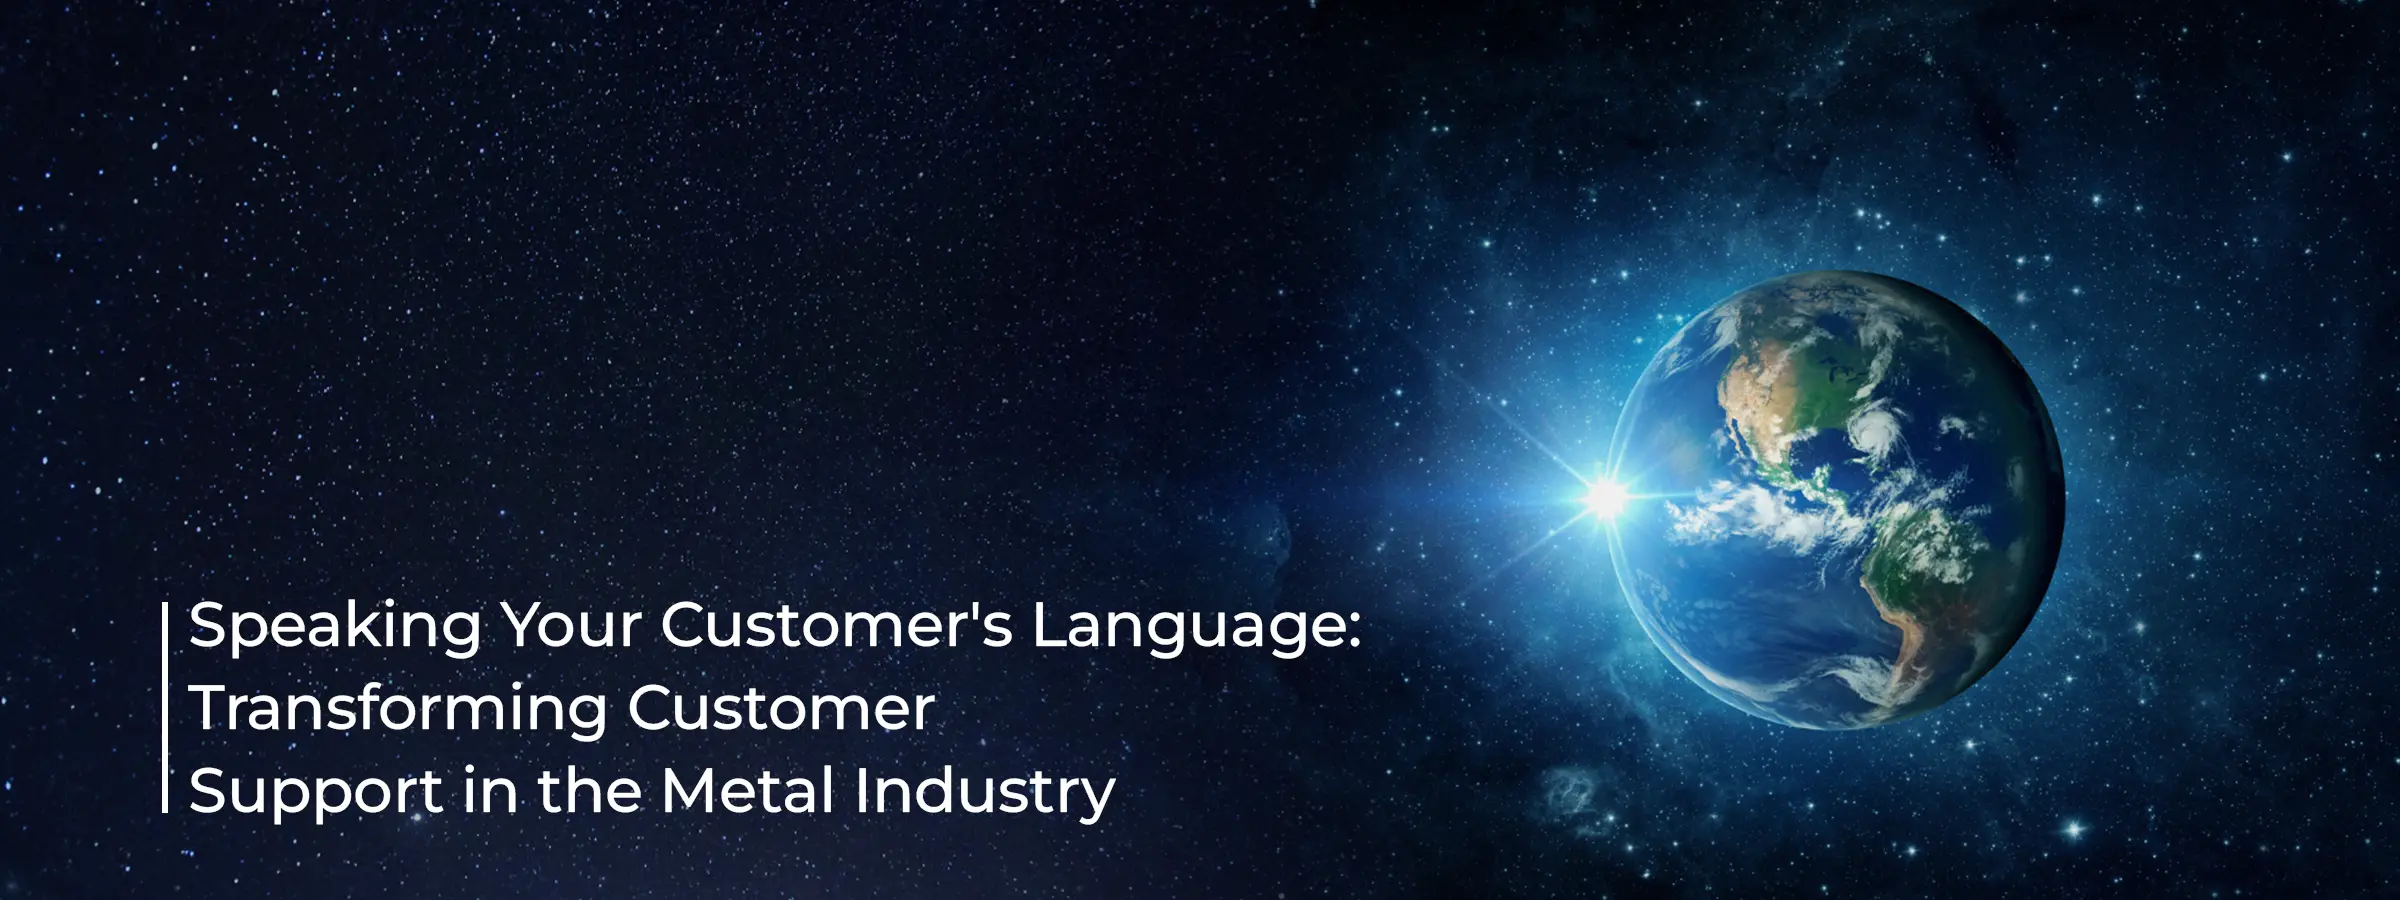 speaking-your-customers-language-transforming-customer-support-in-the-metal-industry